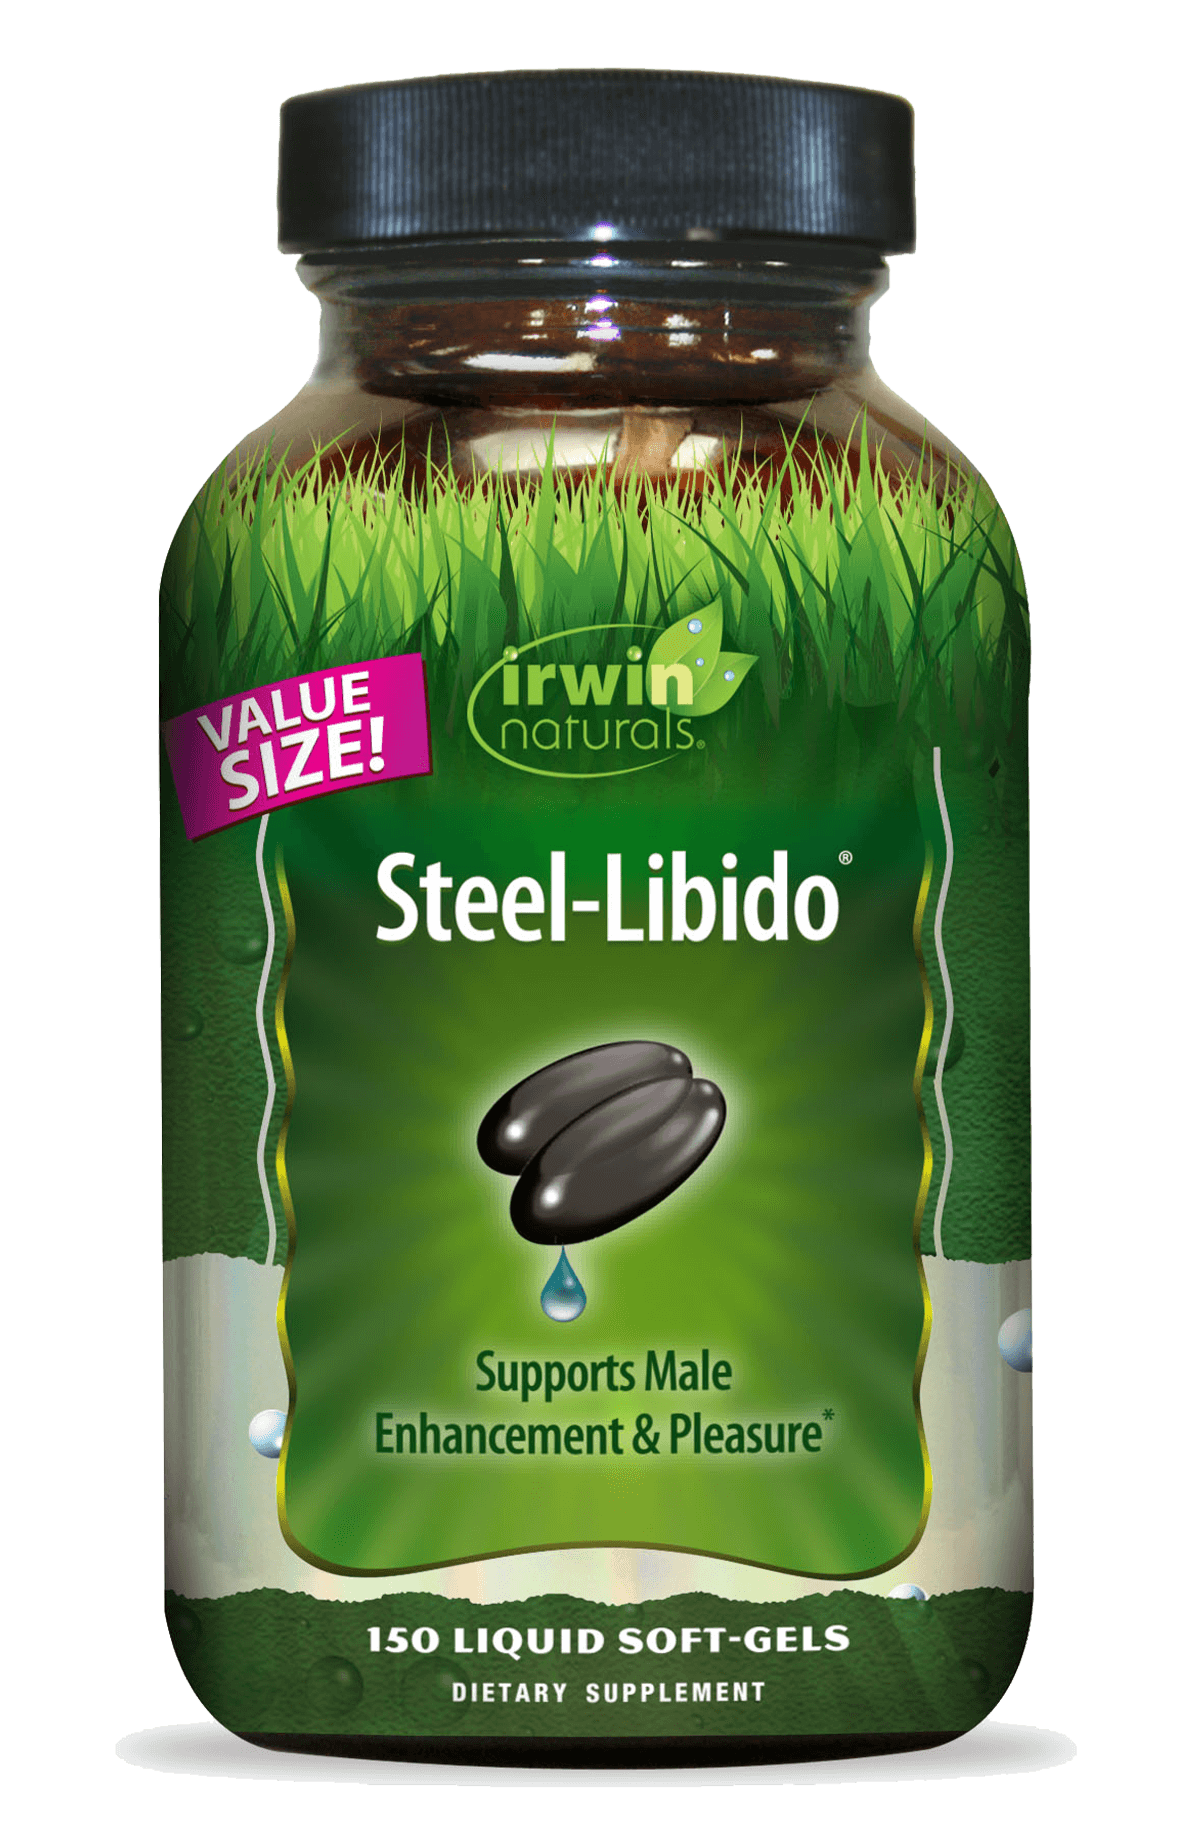 Value Size Steel Libido Supports Male Enhancement and Pleasure by Irwin Naturals